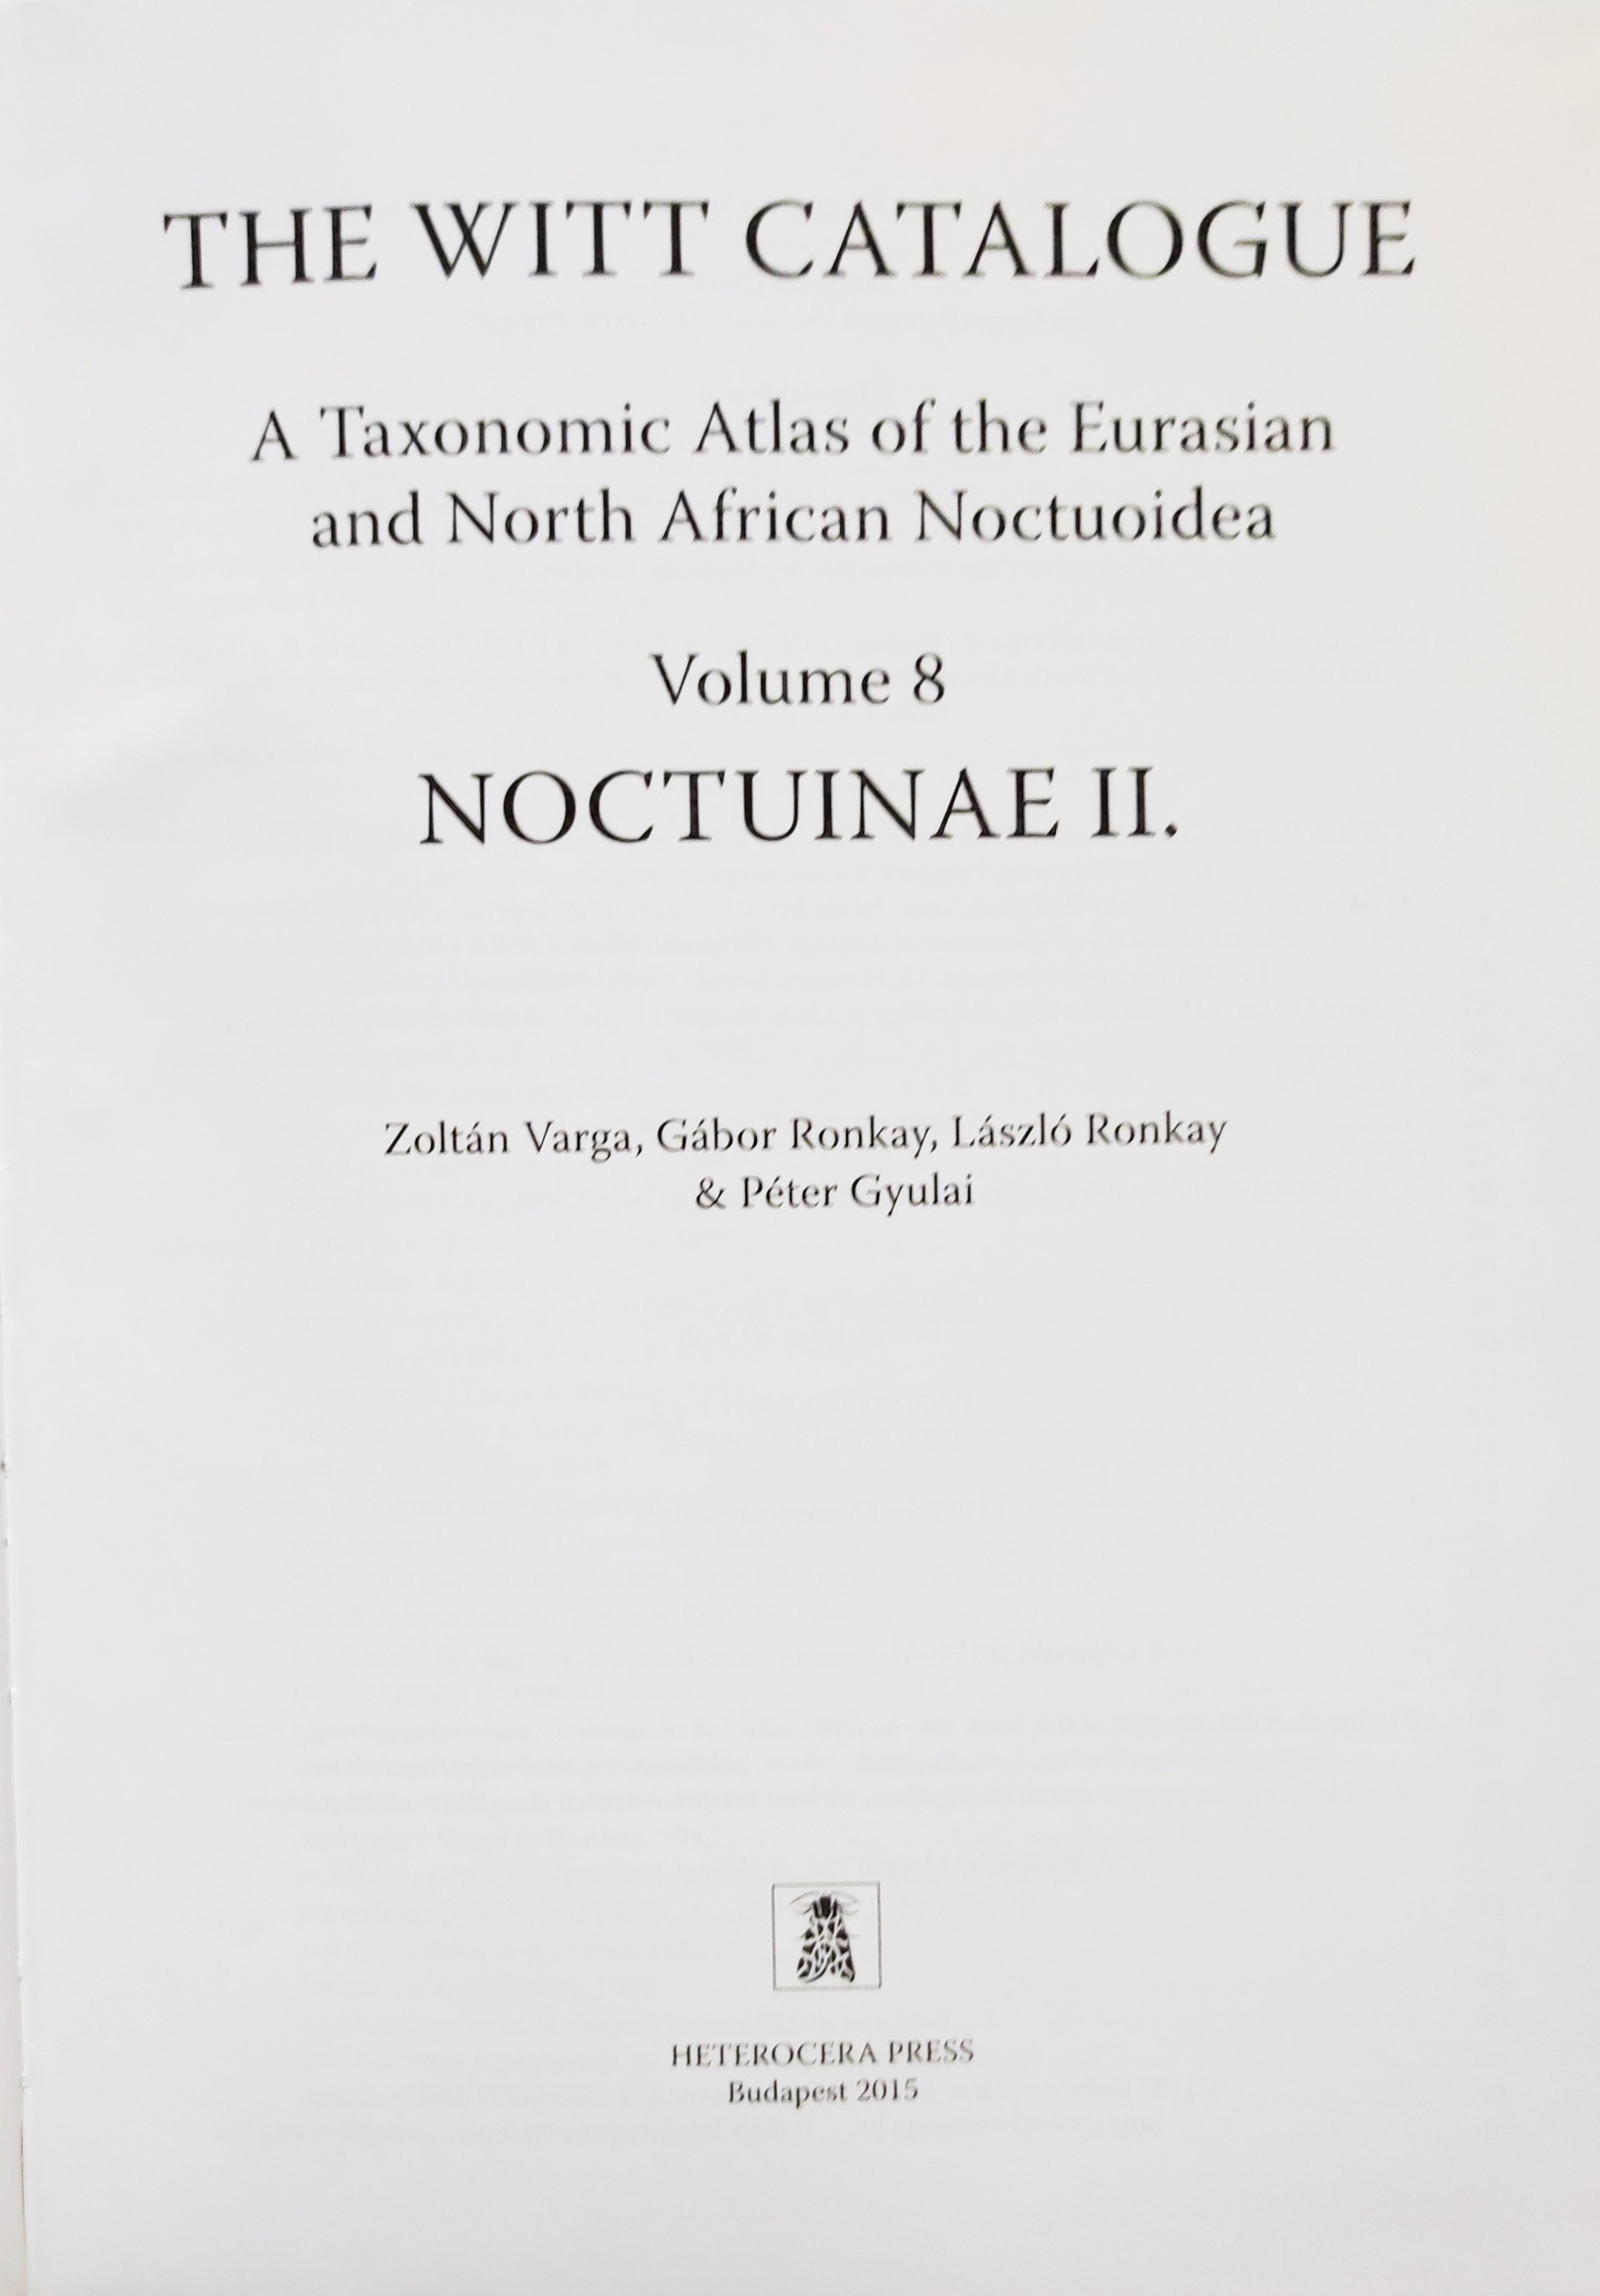 The Witt Catalogue: A Taxonomic Atlas of the Eurasian and North African Noctuoidea. volume 8. - Noctuinae 2. (Rippl-Rónai Múzeum CC BY-NC-ND)